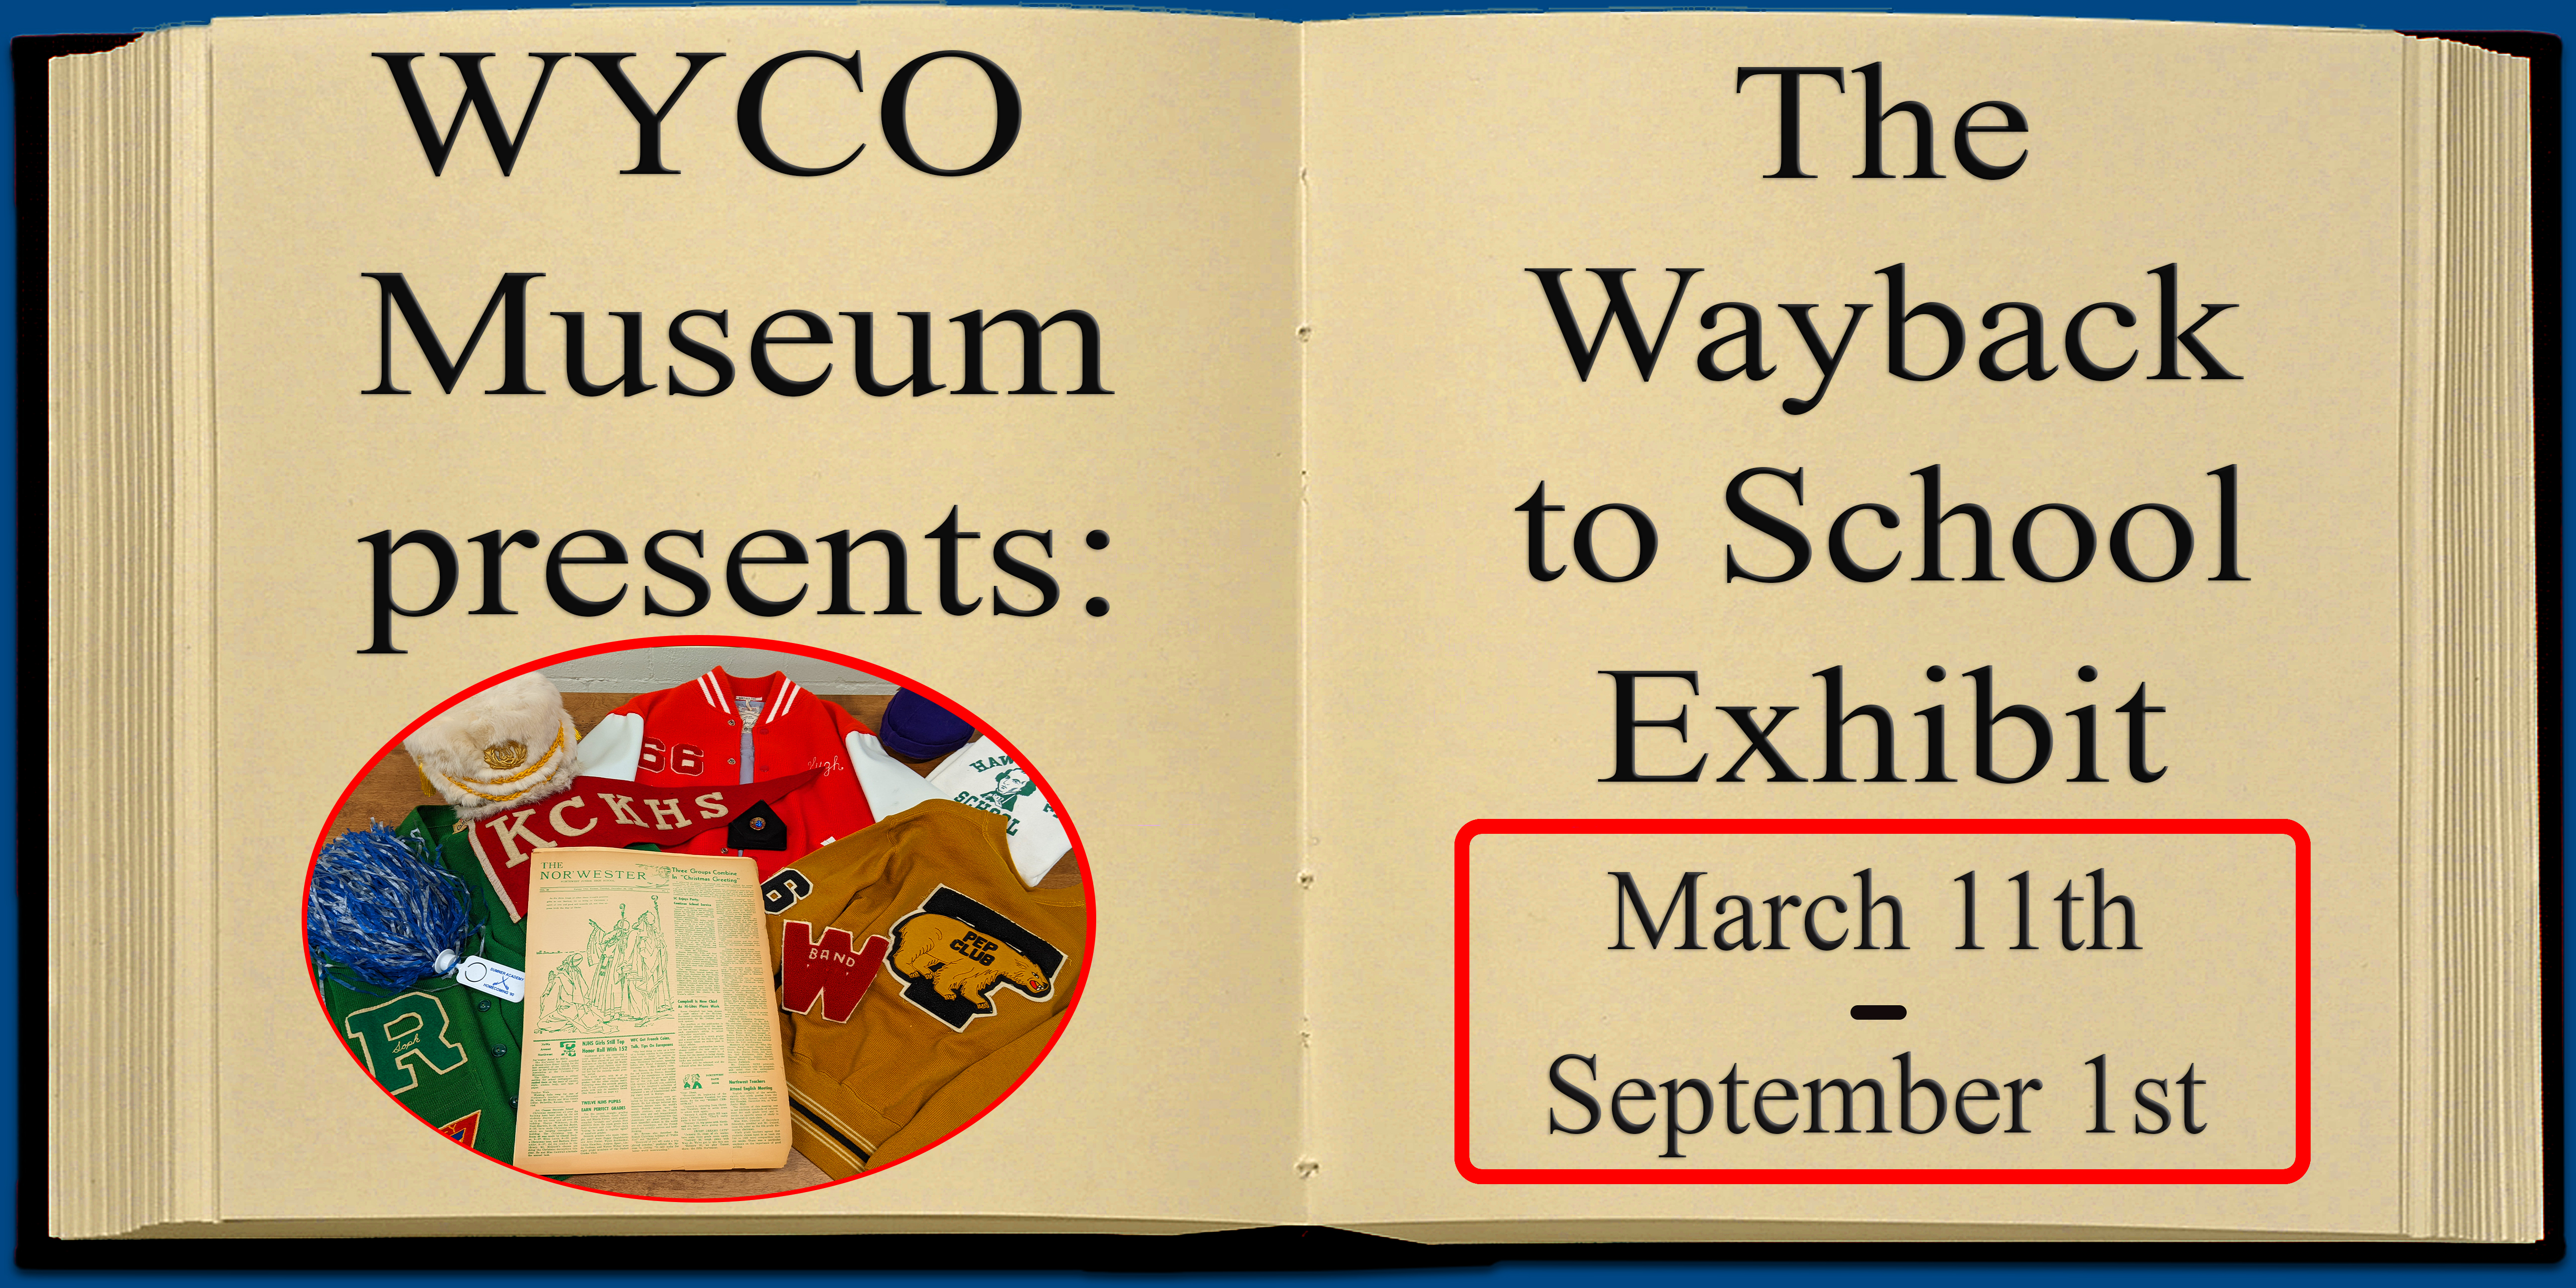 Wayback to school Exhibit is from March 11th to September 1st